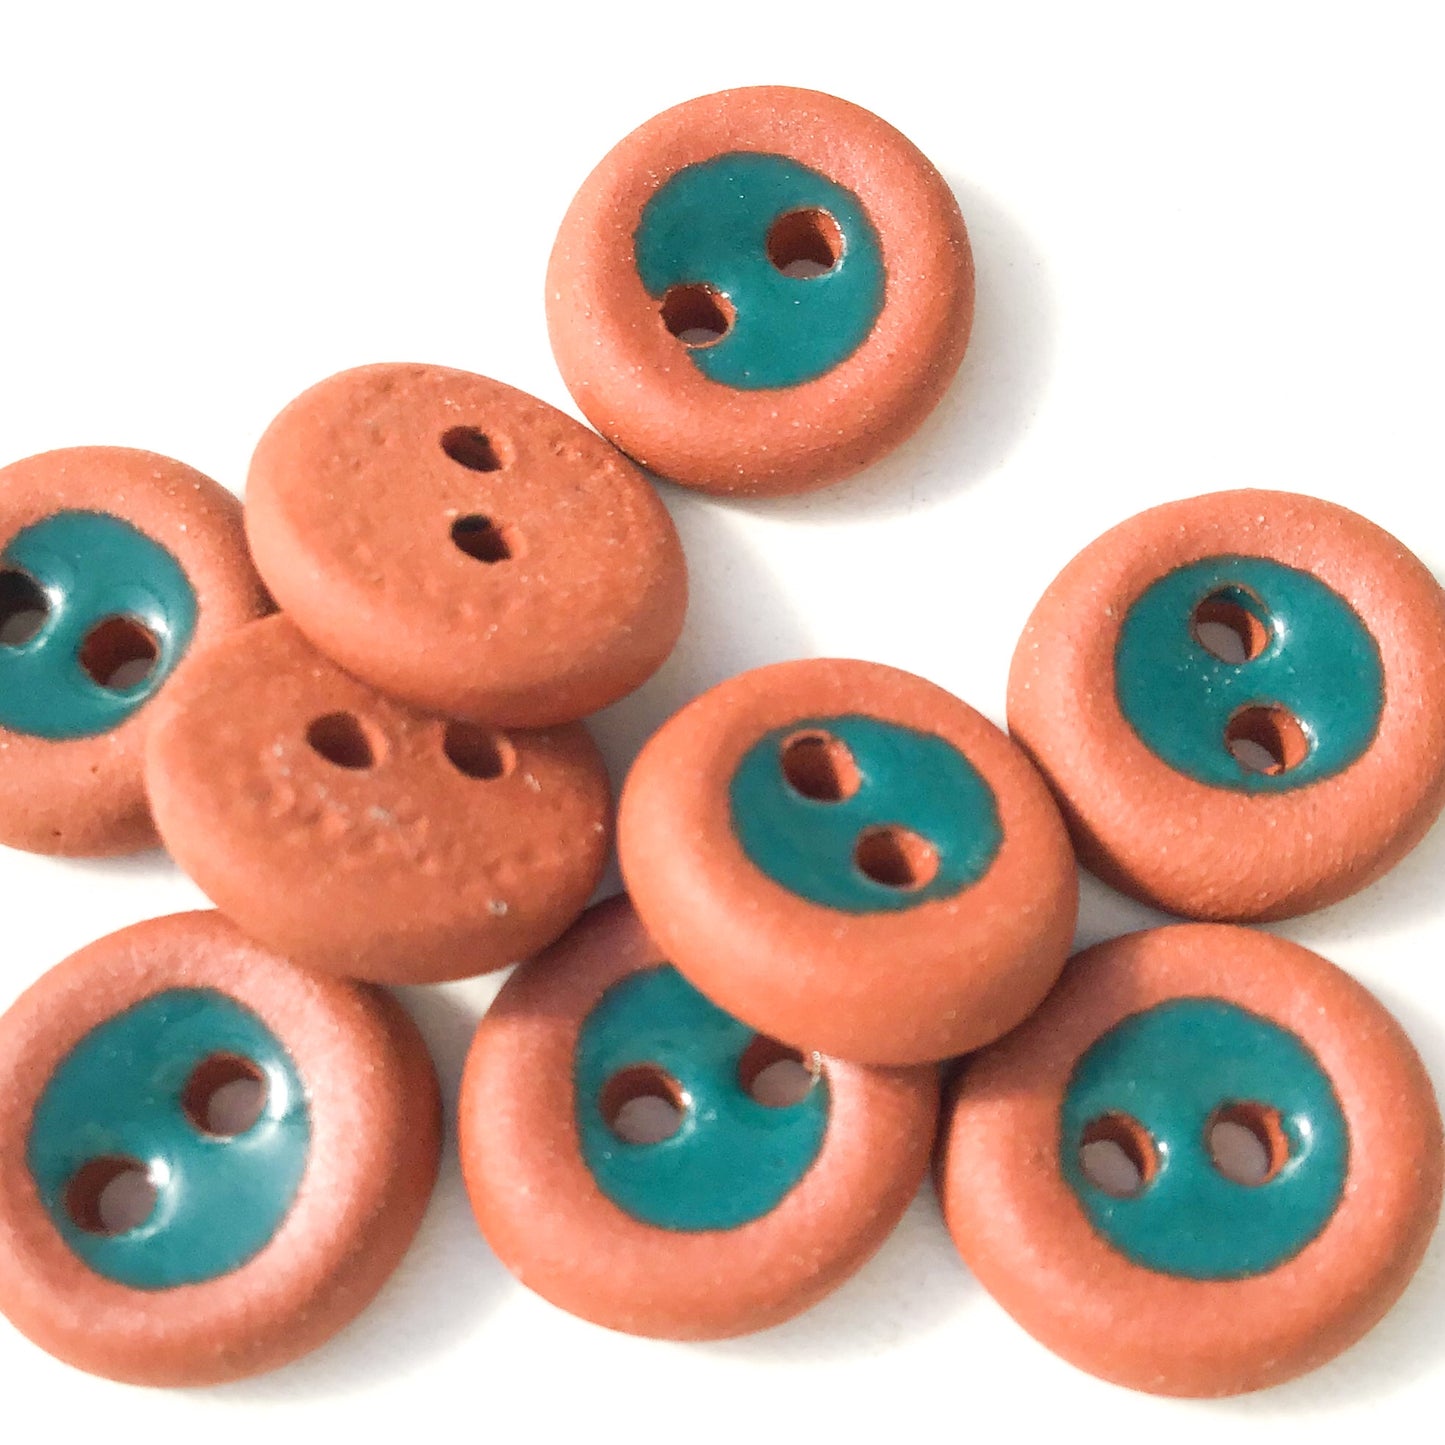 Teal 'Thumb Print' Ceramic Buttons - Teal Clay Buttons - 1/2" - 9 Pack